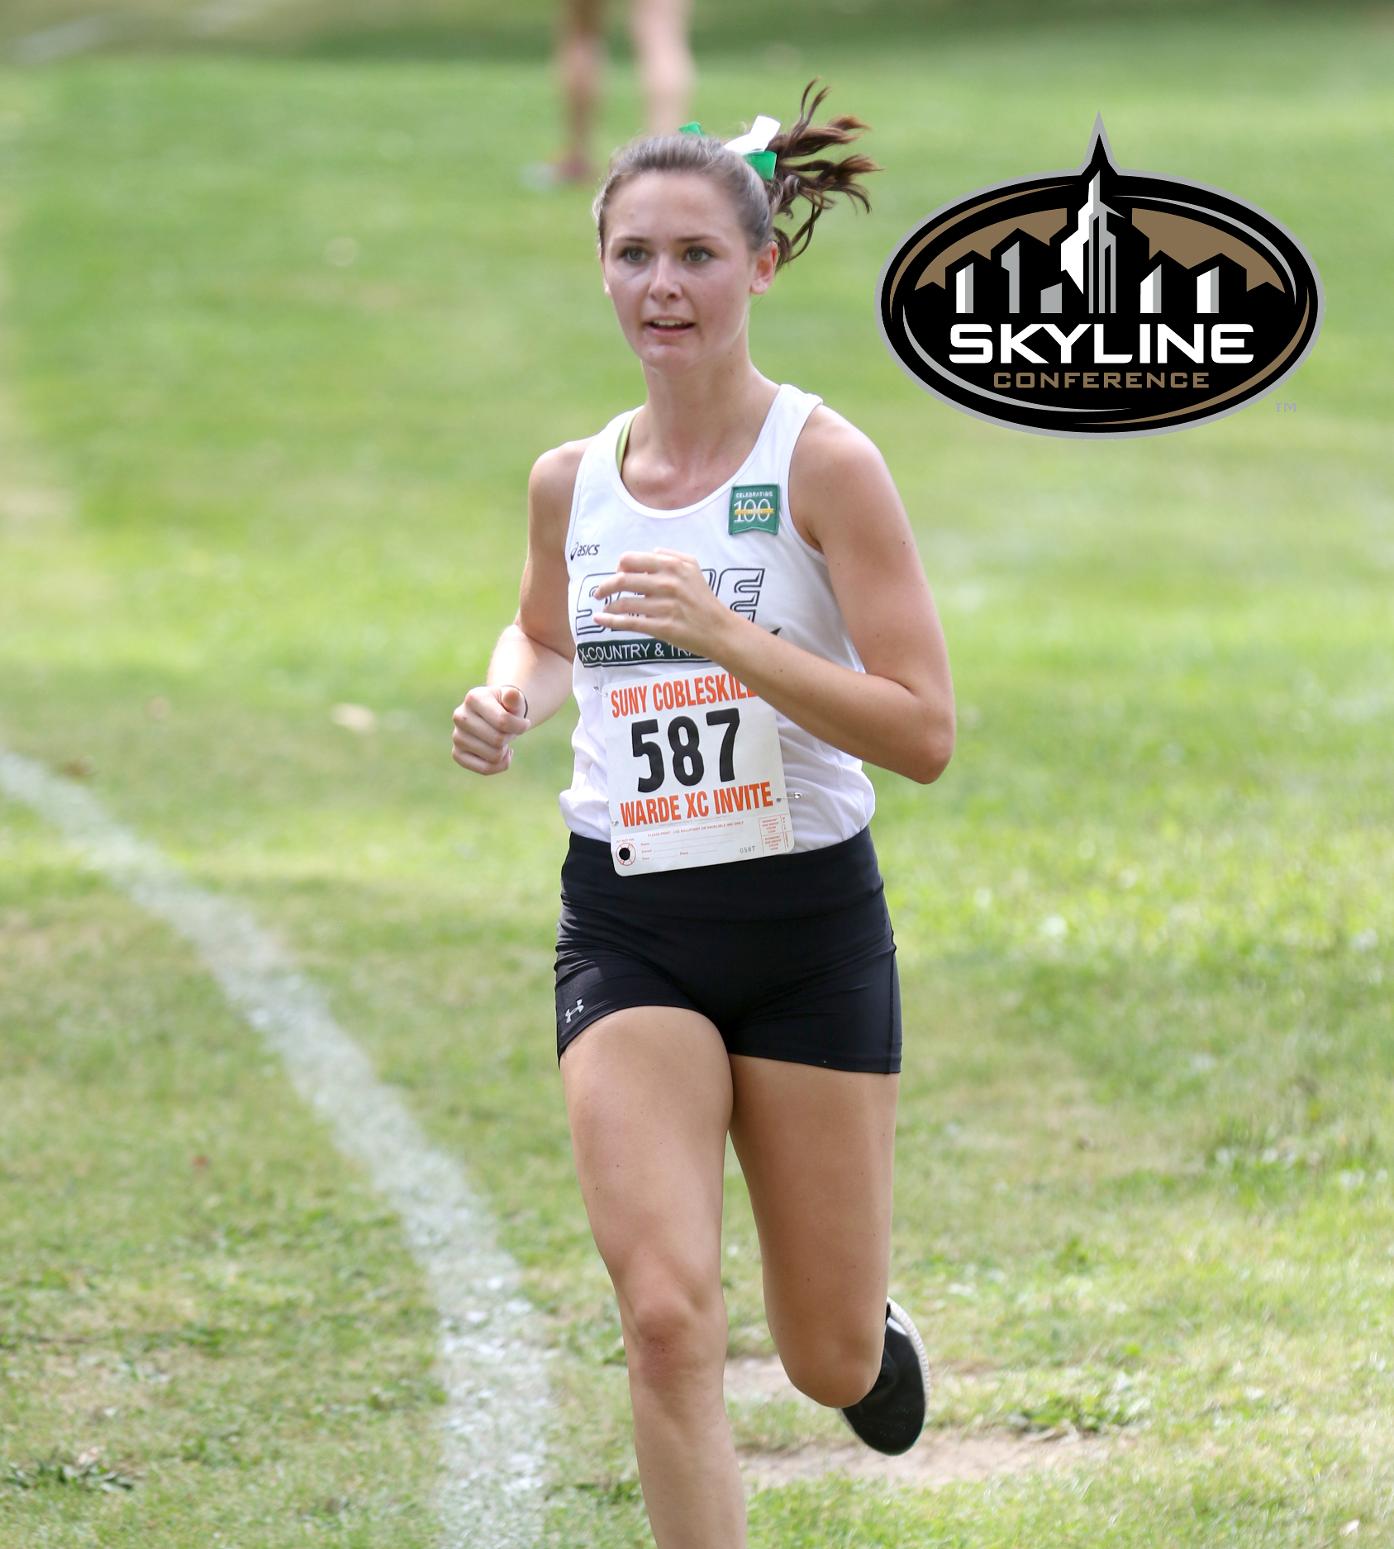 Farrell selected as Skyline Rookie Runner of the Week